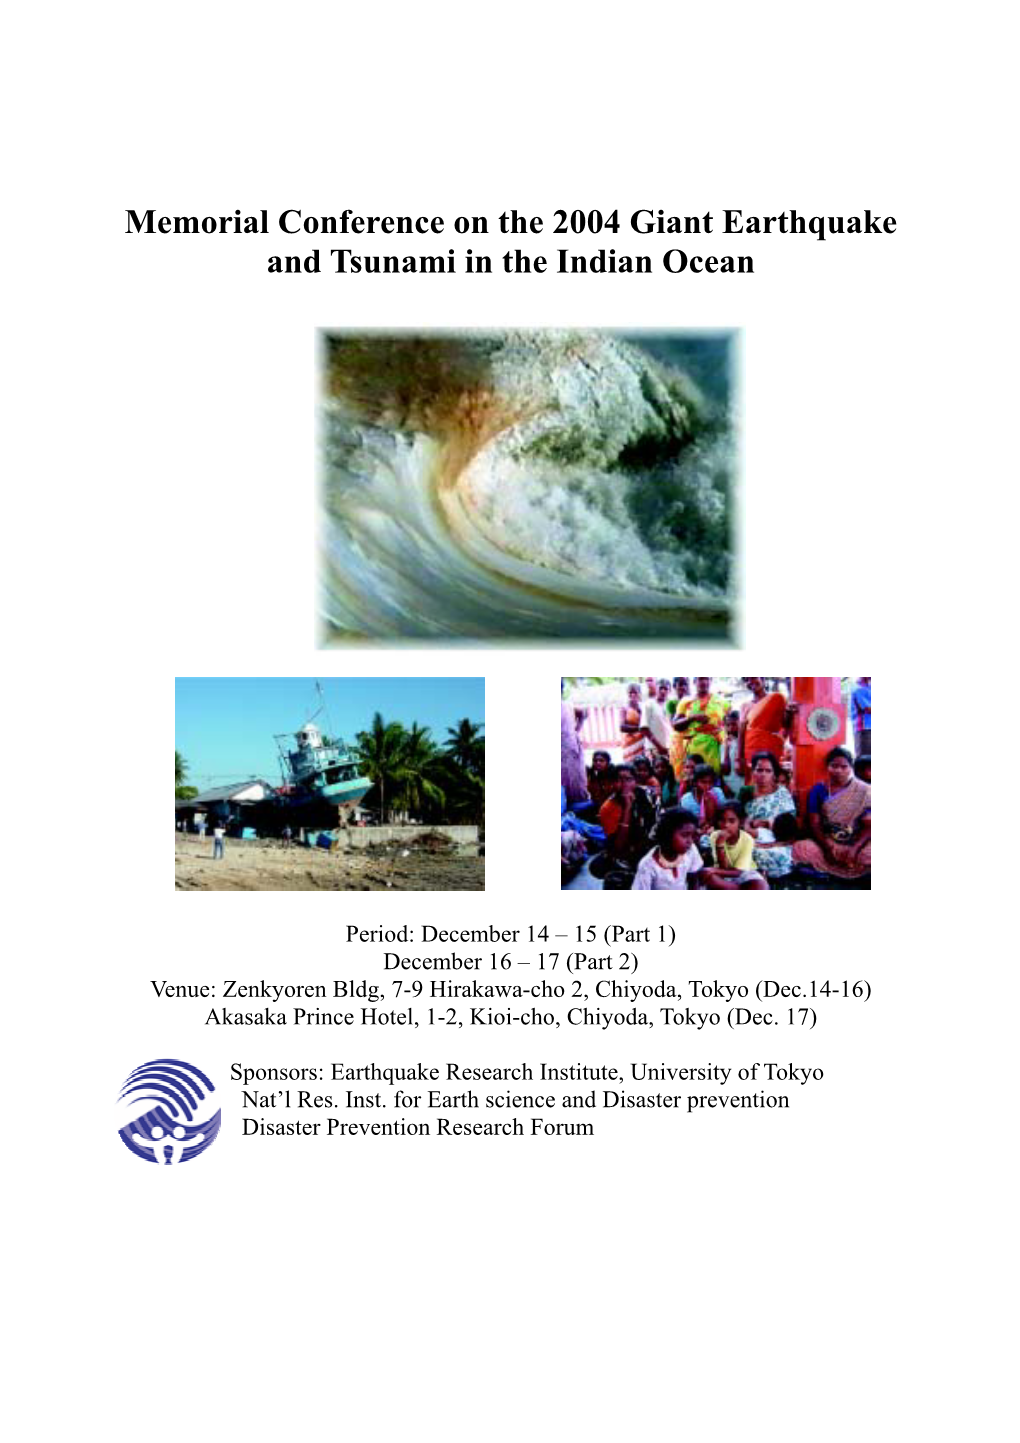 Memorial Conference on the 2004 Giant Earthquake and Tsunami in the Indian Ocean